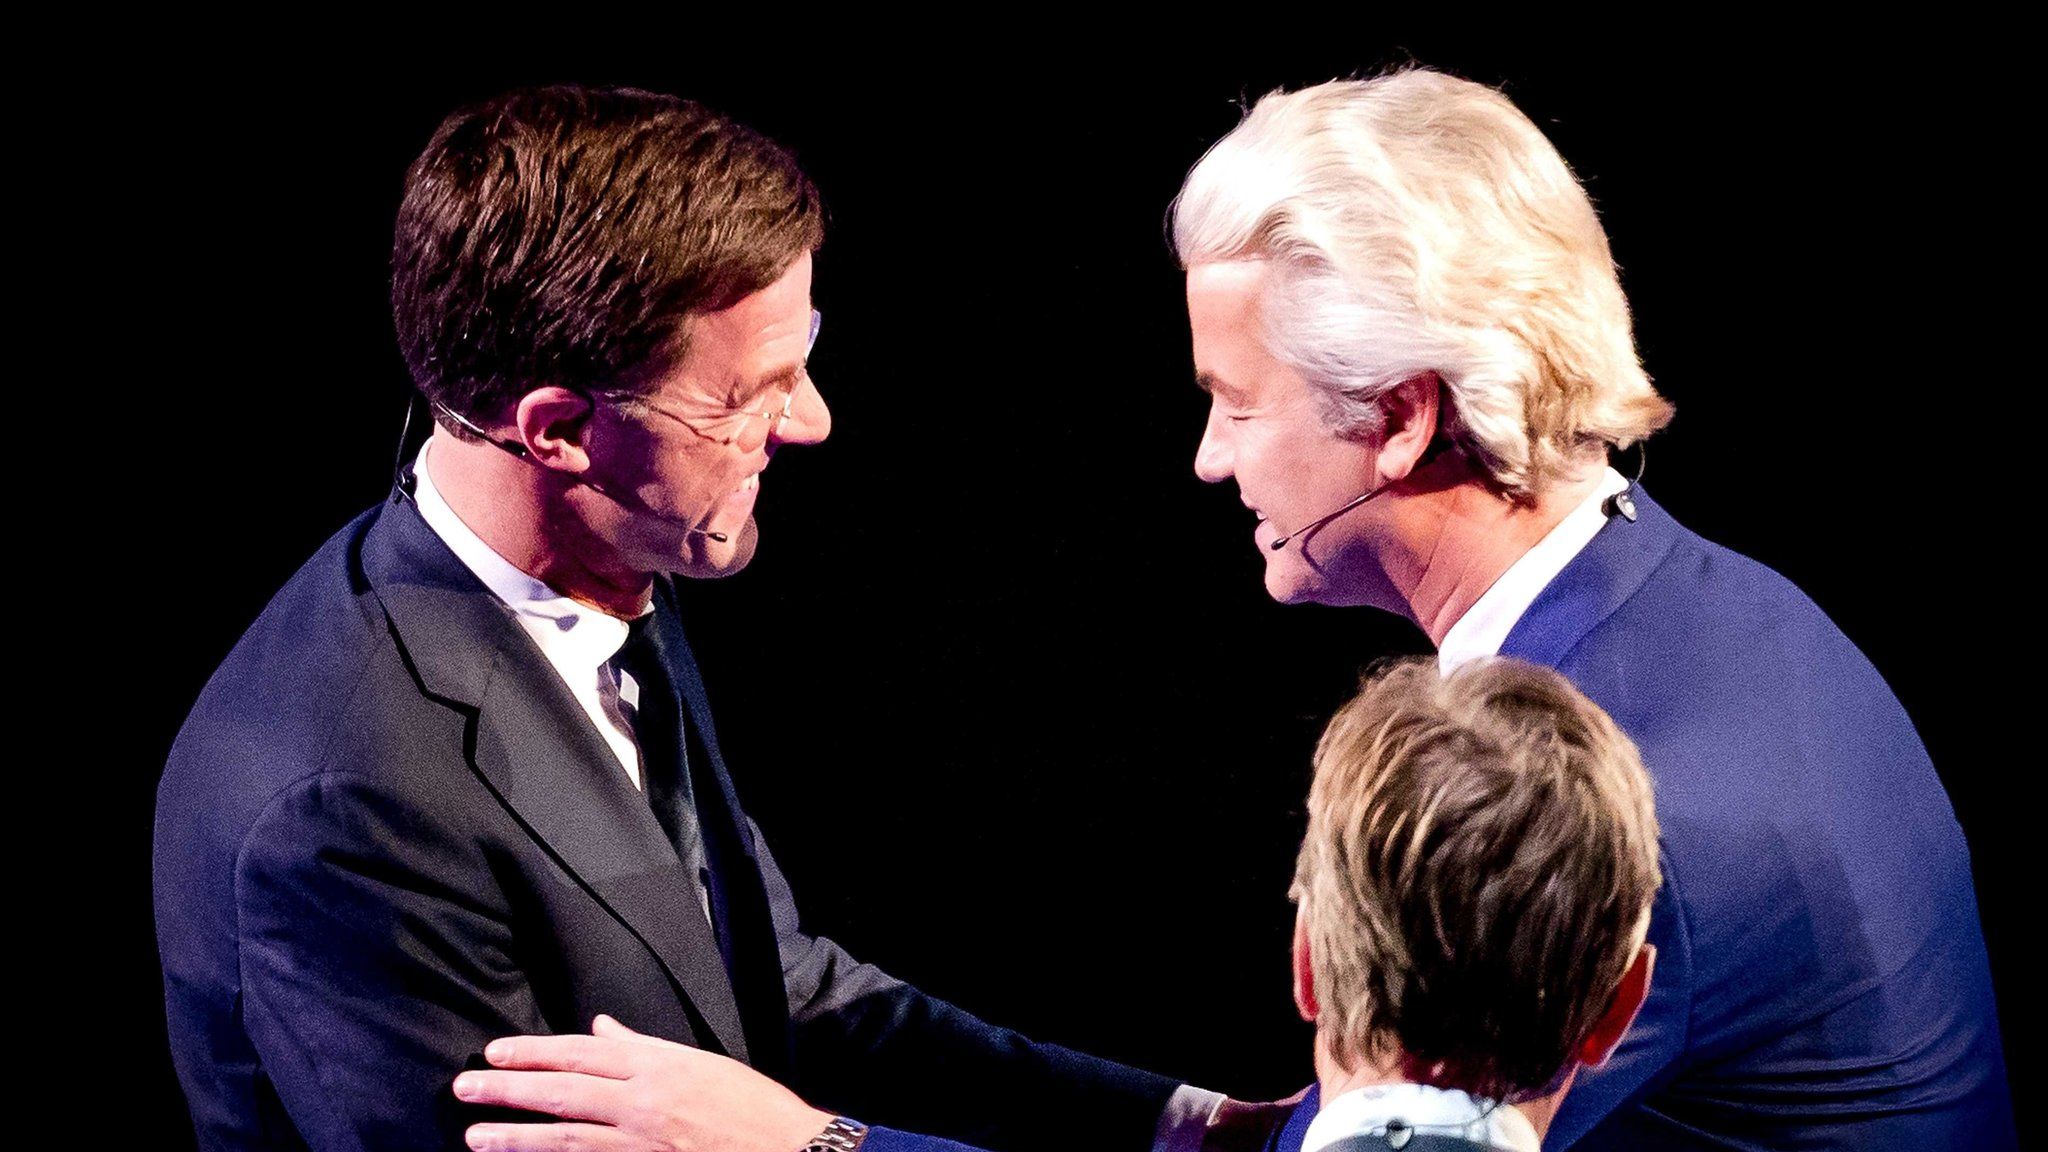 Dutch Prime Minister Mark Rutte (L) of the Liberal Party (VVD) and the right-wing Freedom Party (PVV) leader Geert Wilders (R) shake hands during a TV debate